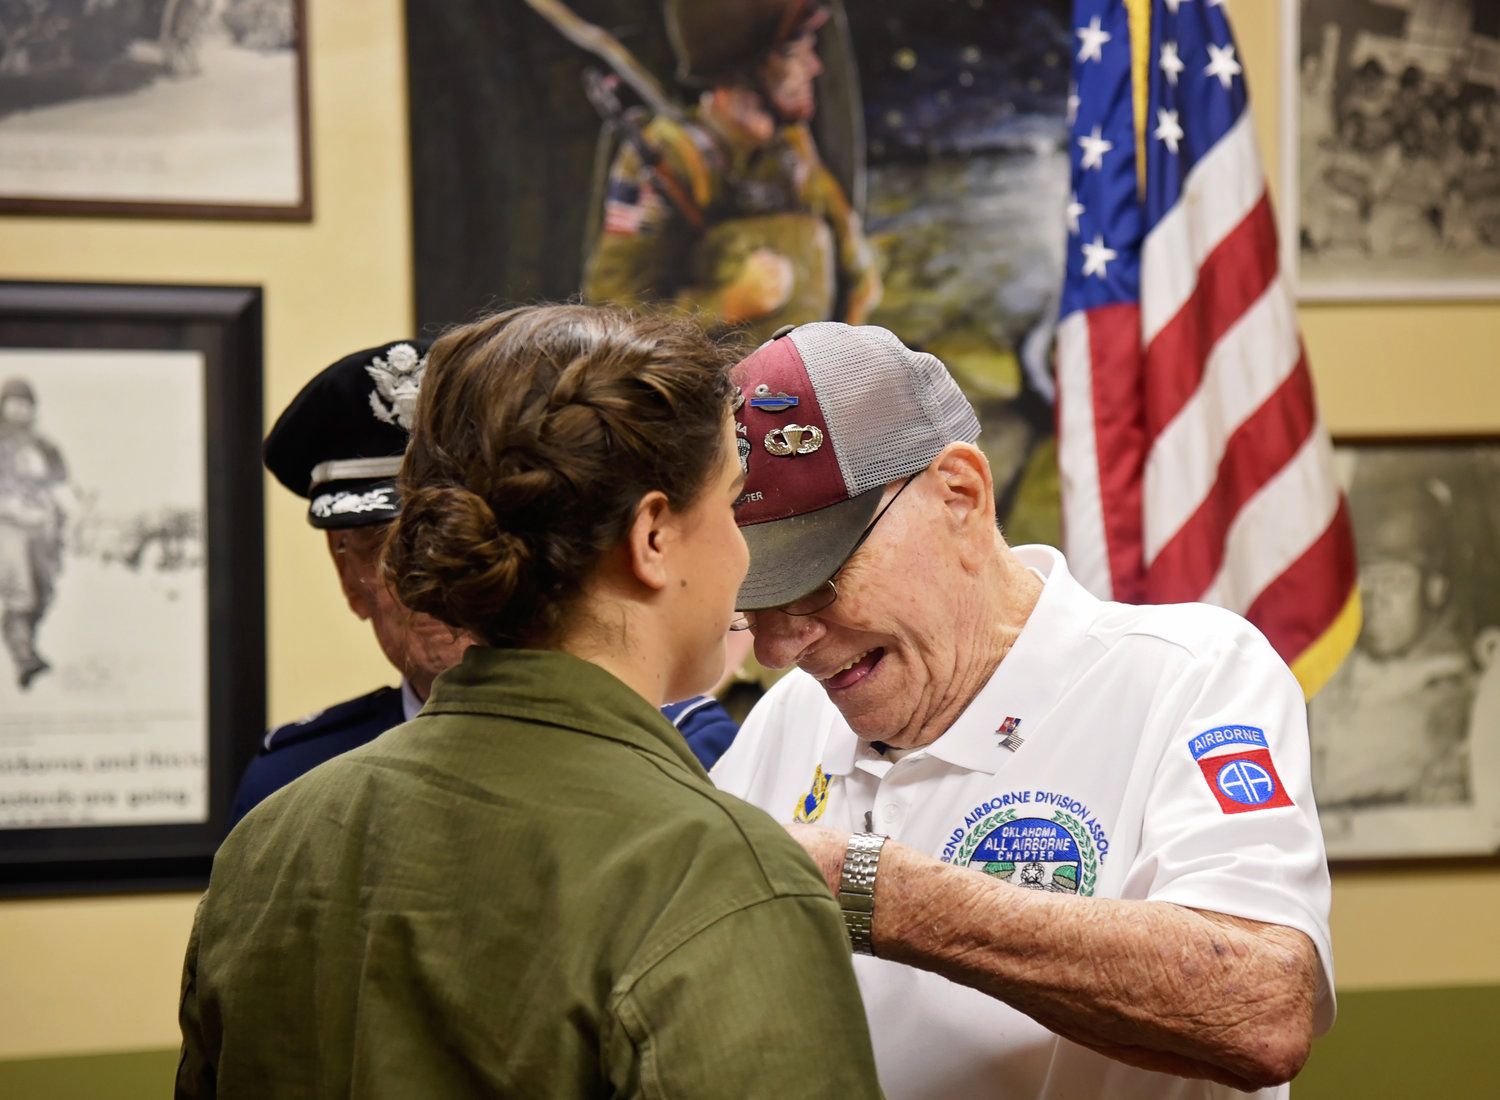 Liberty Phillips was the only female graduate of Summer Jump School 2022. Visiting veteran Jerry Ring pinned her wings at the wing pinning ceremony held July 23, 2022.